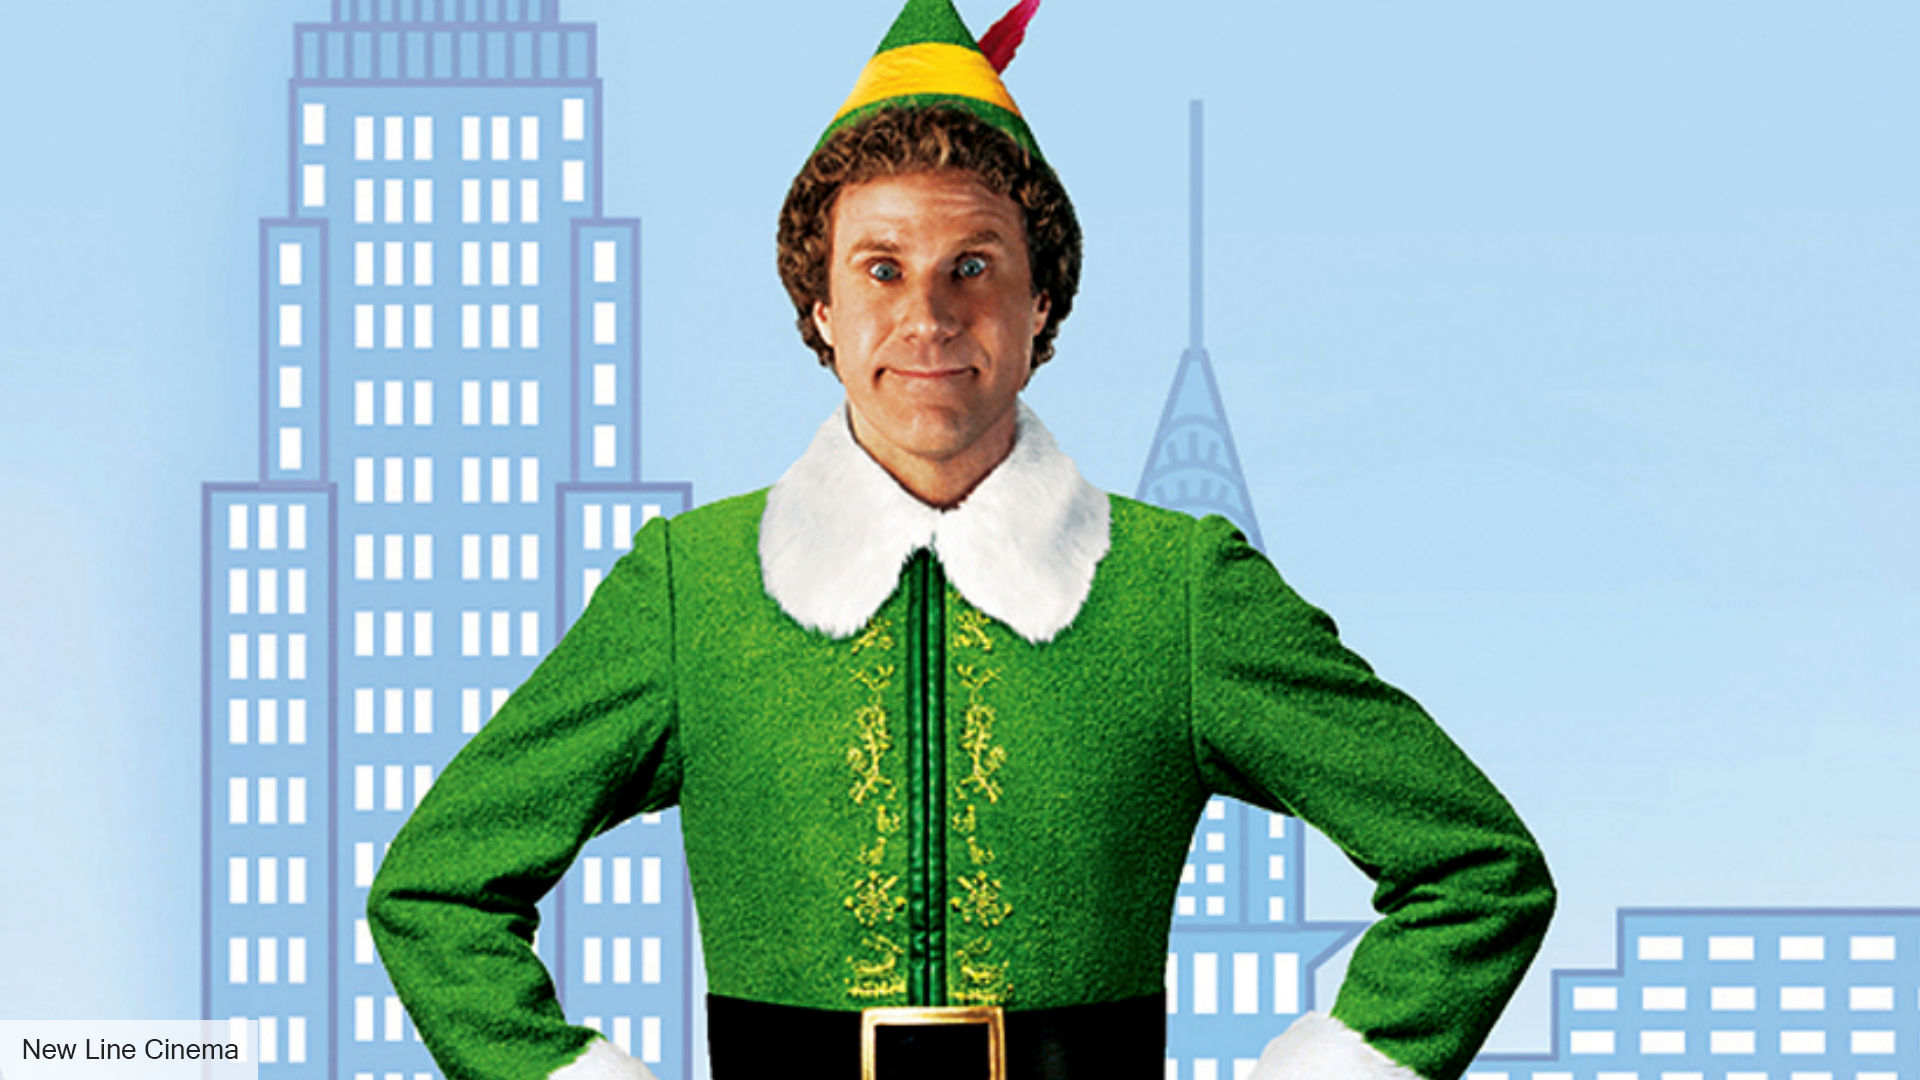 Will Ferrell is the ultimate Christmas movie star